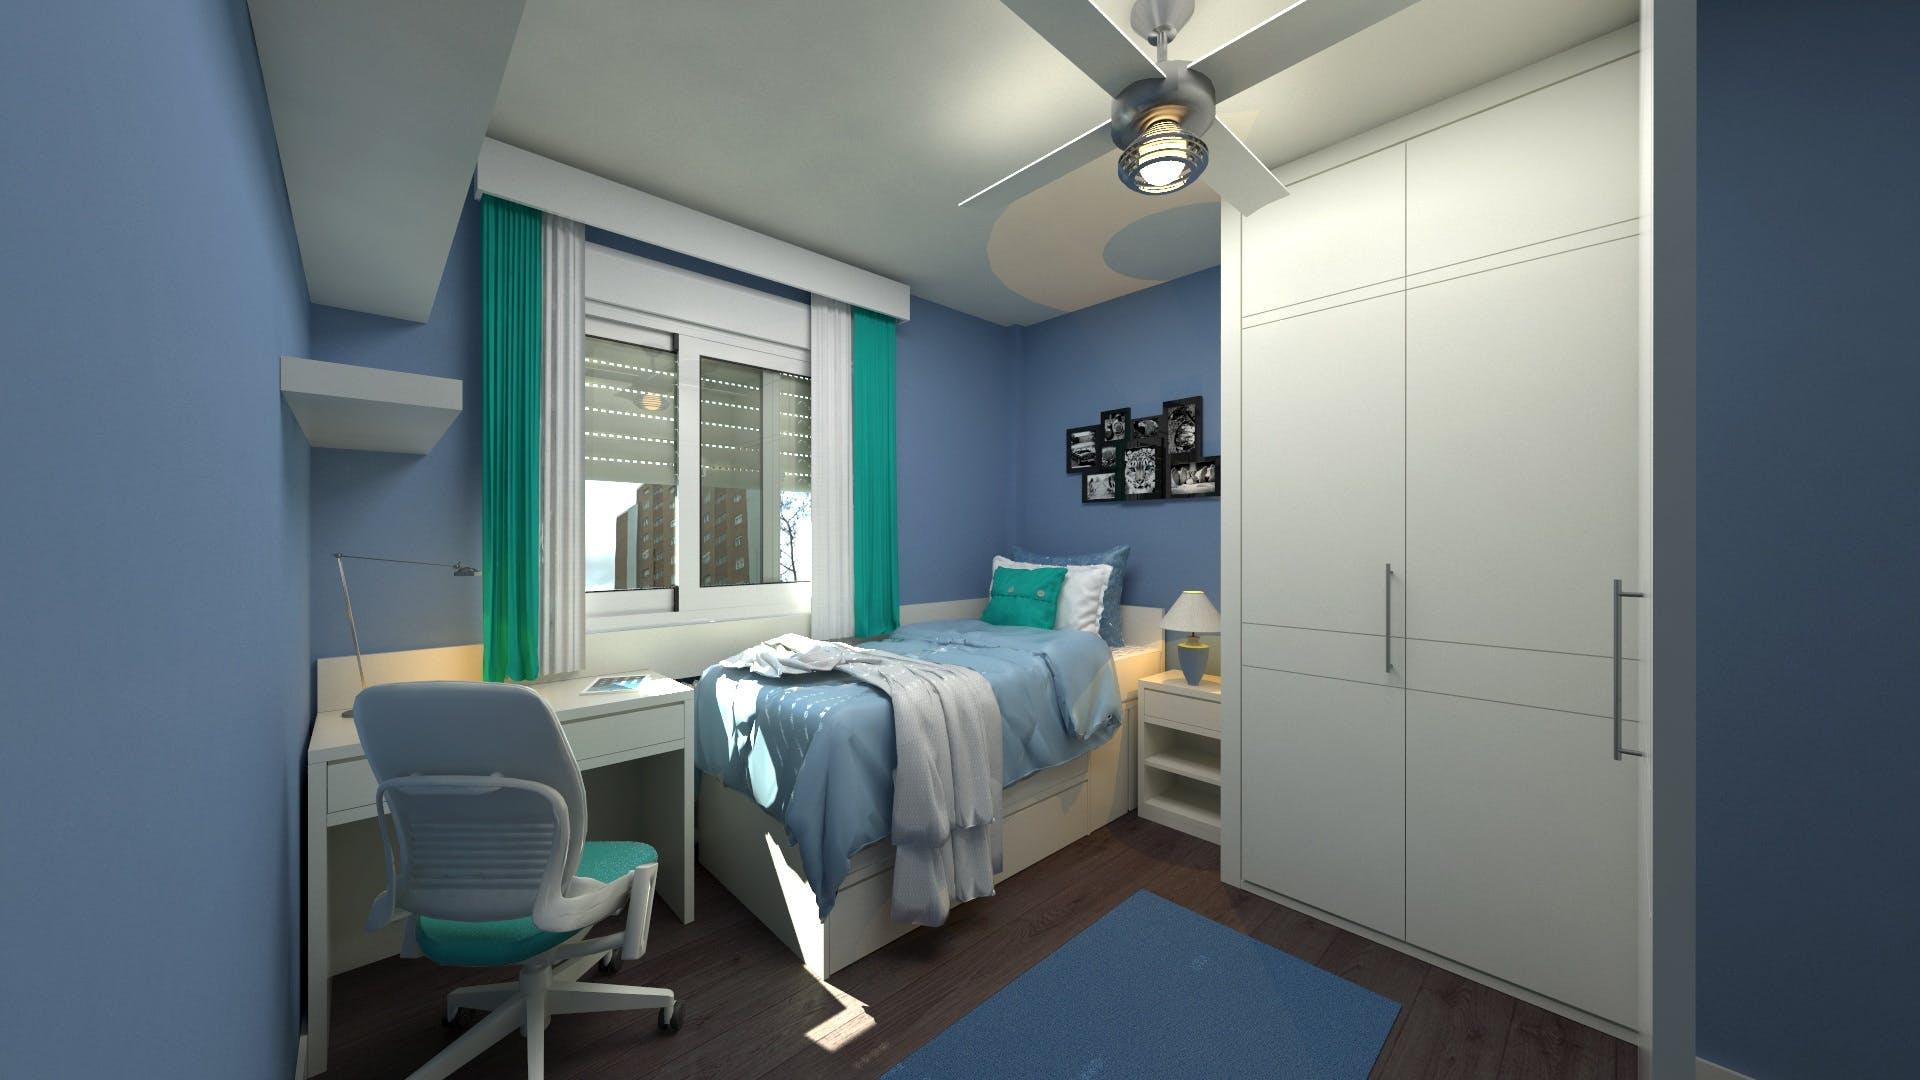 How much does it cost to build a college dorm? 